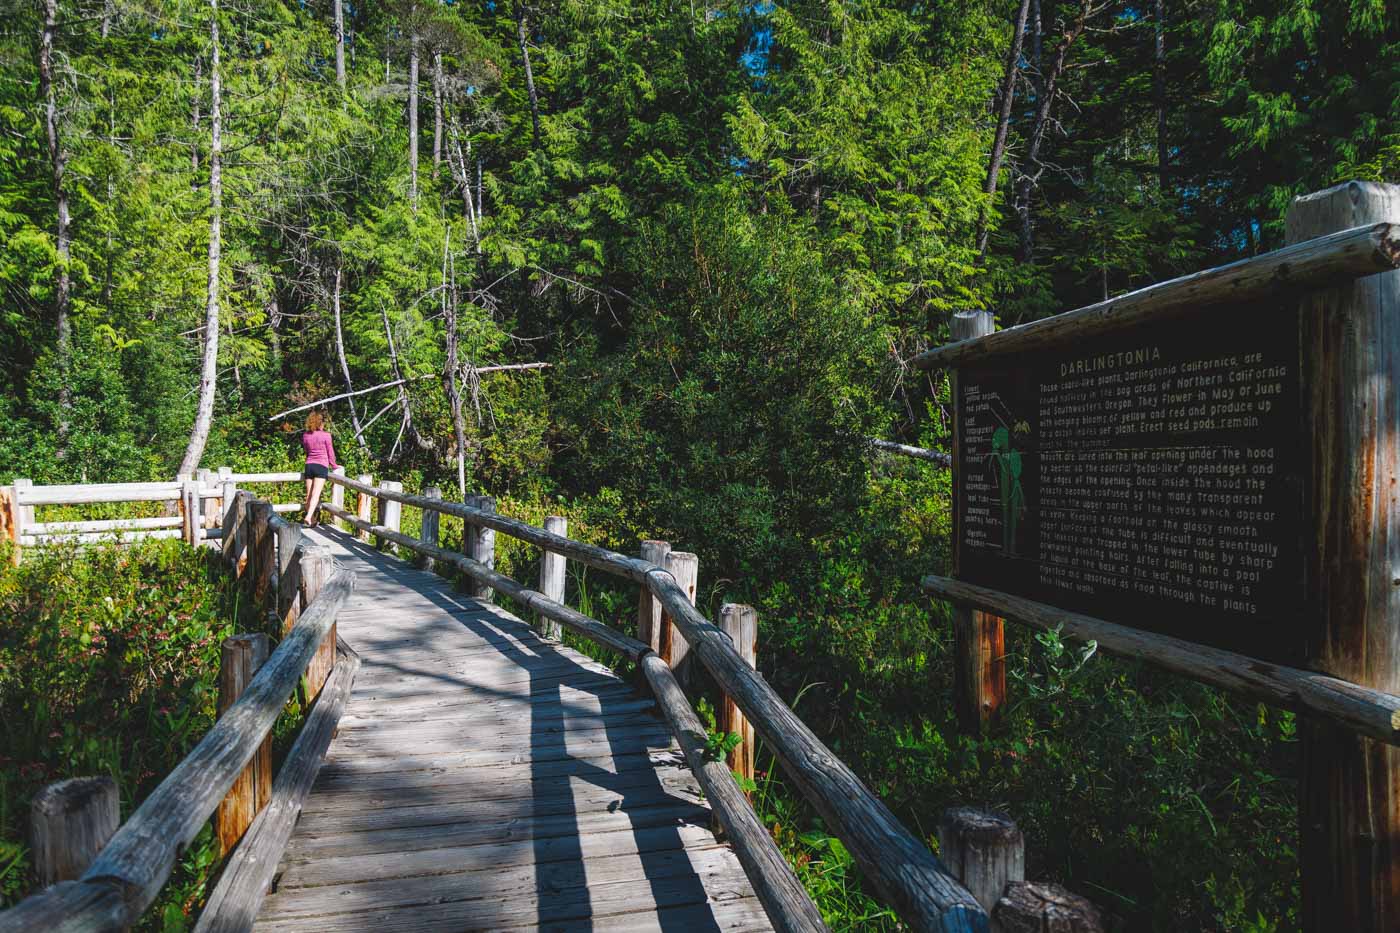 Nina walking along a wooden boardwalk in the forest by a huge information sign in Darlingtonia State Natural Site.